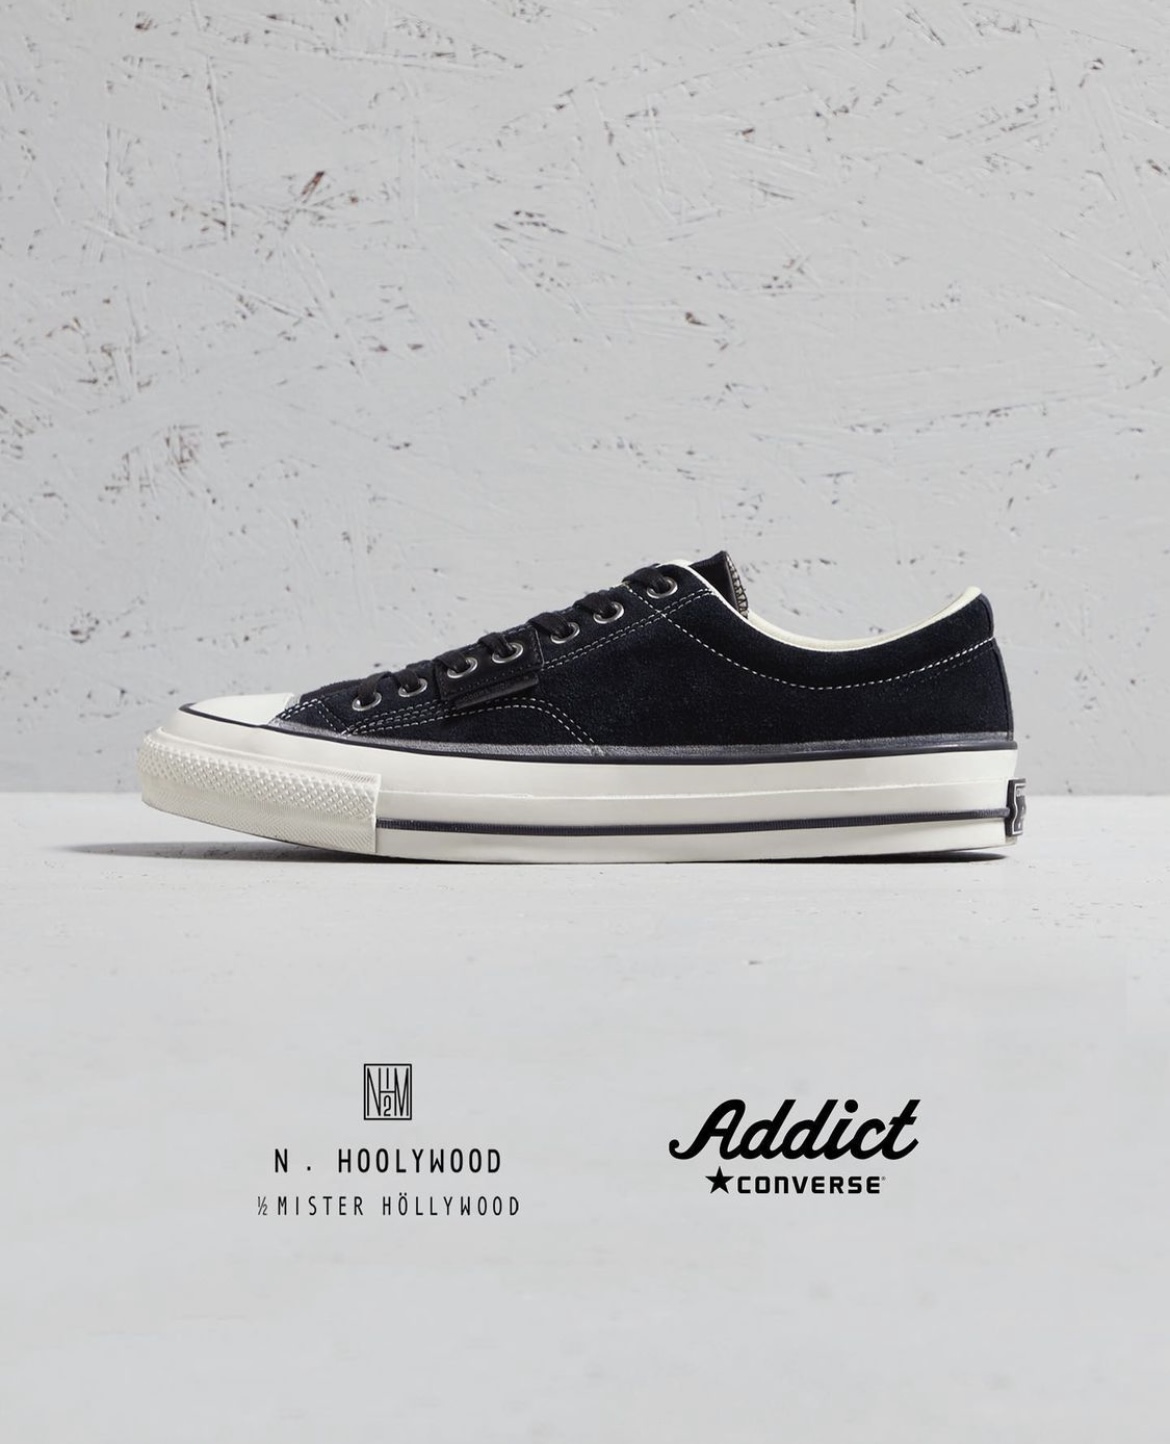 【N.HOOLYWOOD COMPILE × CONVERSE ADDICT】- CHUCK TAYLOR SUEDE NH OX ...